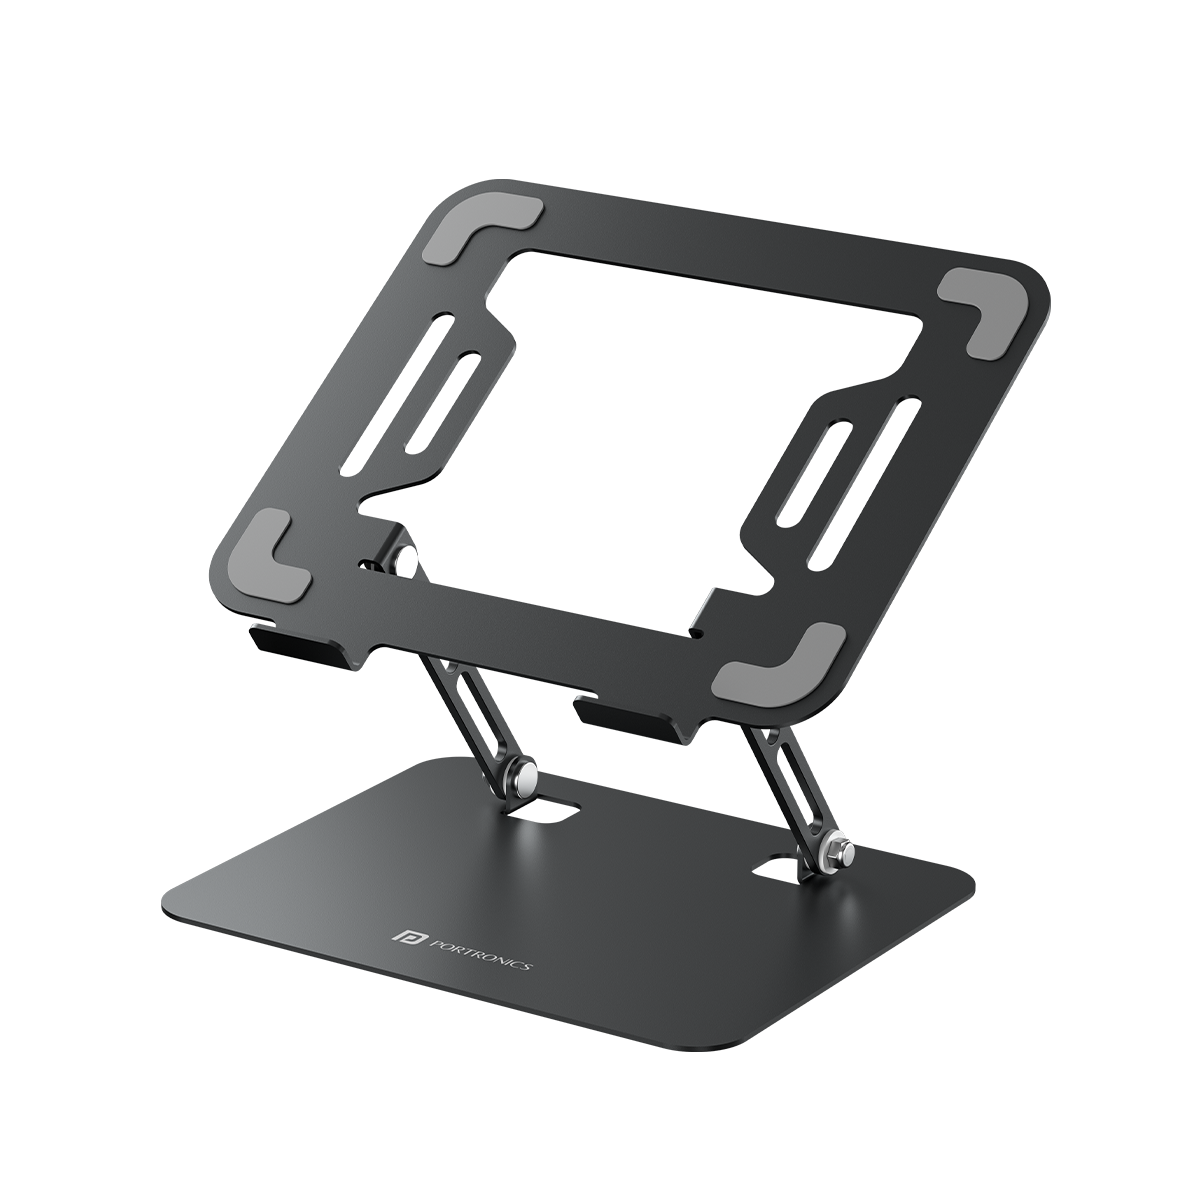 Black Portronics My Buddy K3 Pro Laptop Stand With Height Adjustable